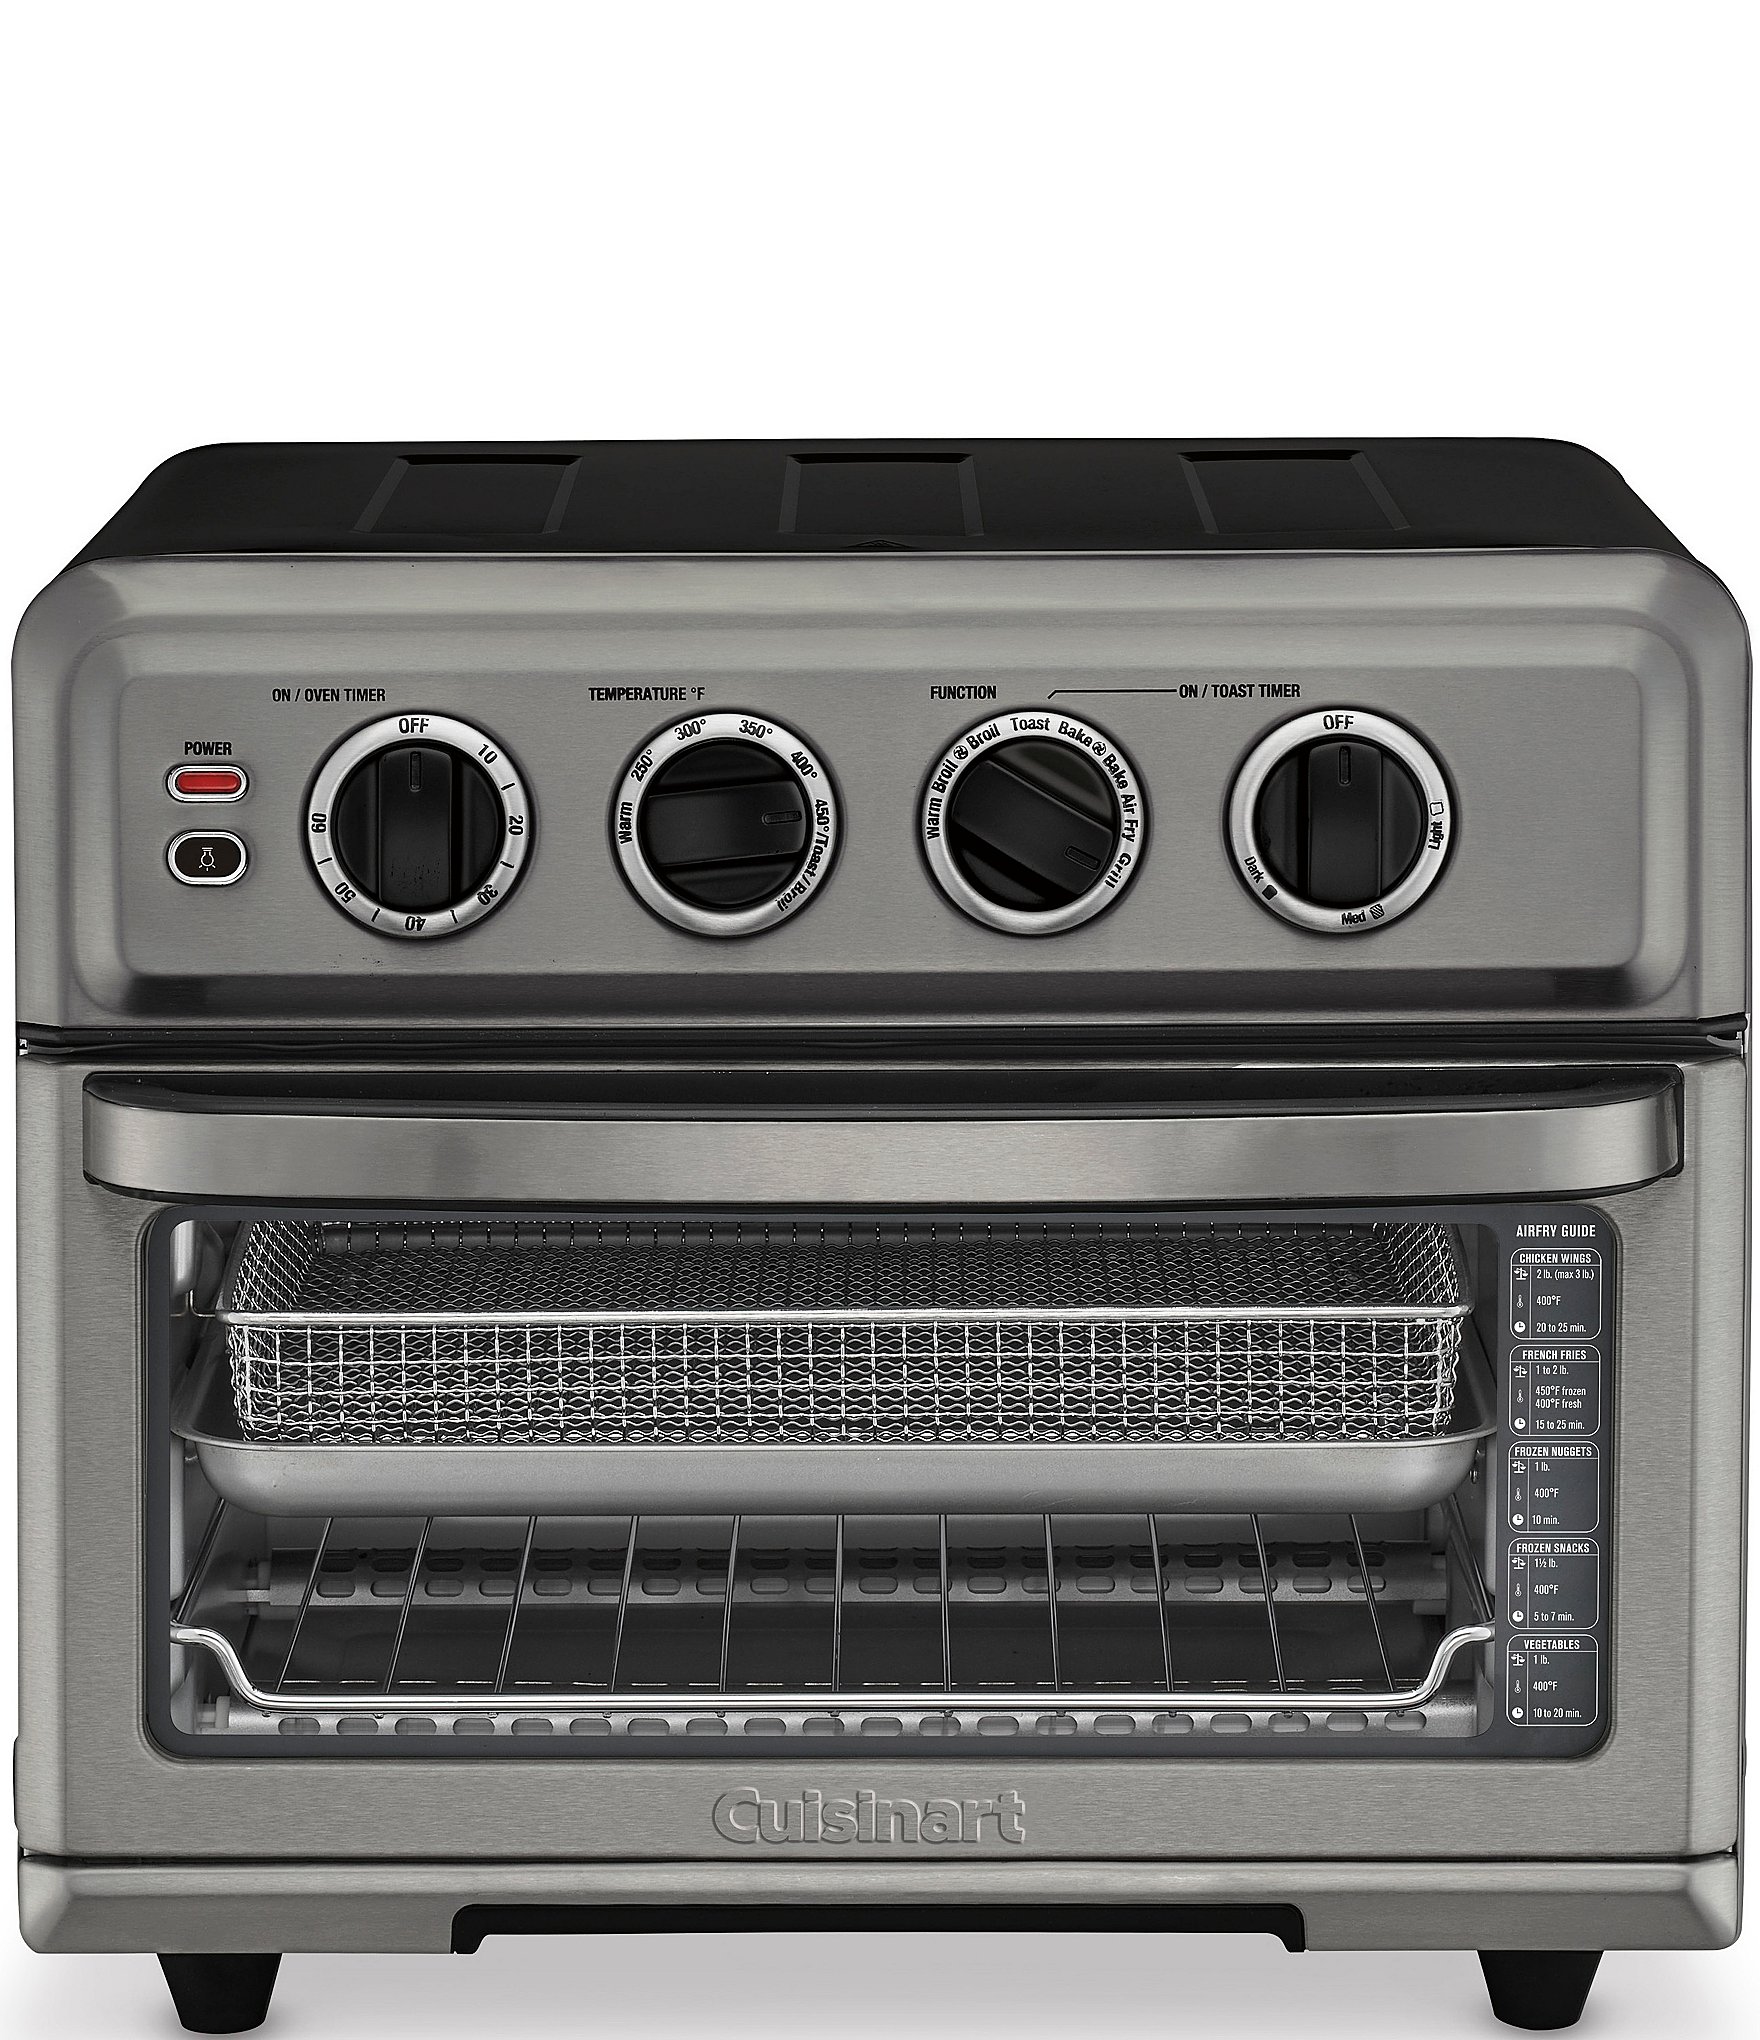 https://dimg.dillards.com/is/image/DillardsZoom/zoom/cuisinart-airfryer-toaster-oven-with-grill/00000000_zi_26e785df-f9ac-4fee-829c-0d3666760295.jpg